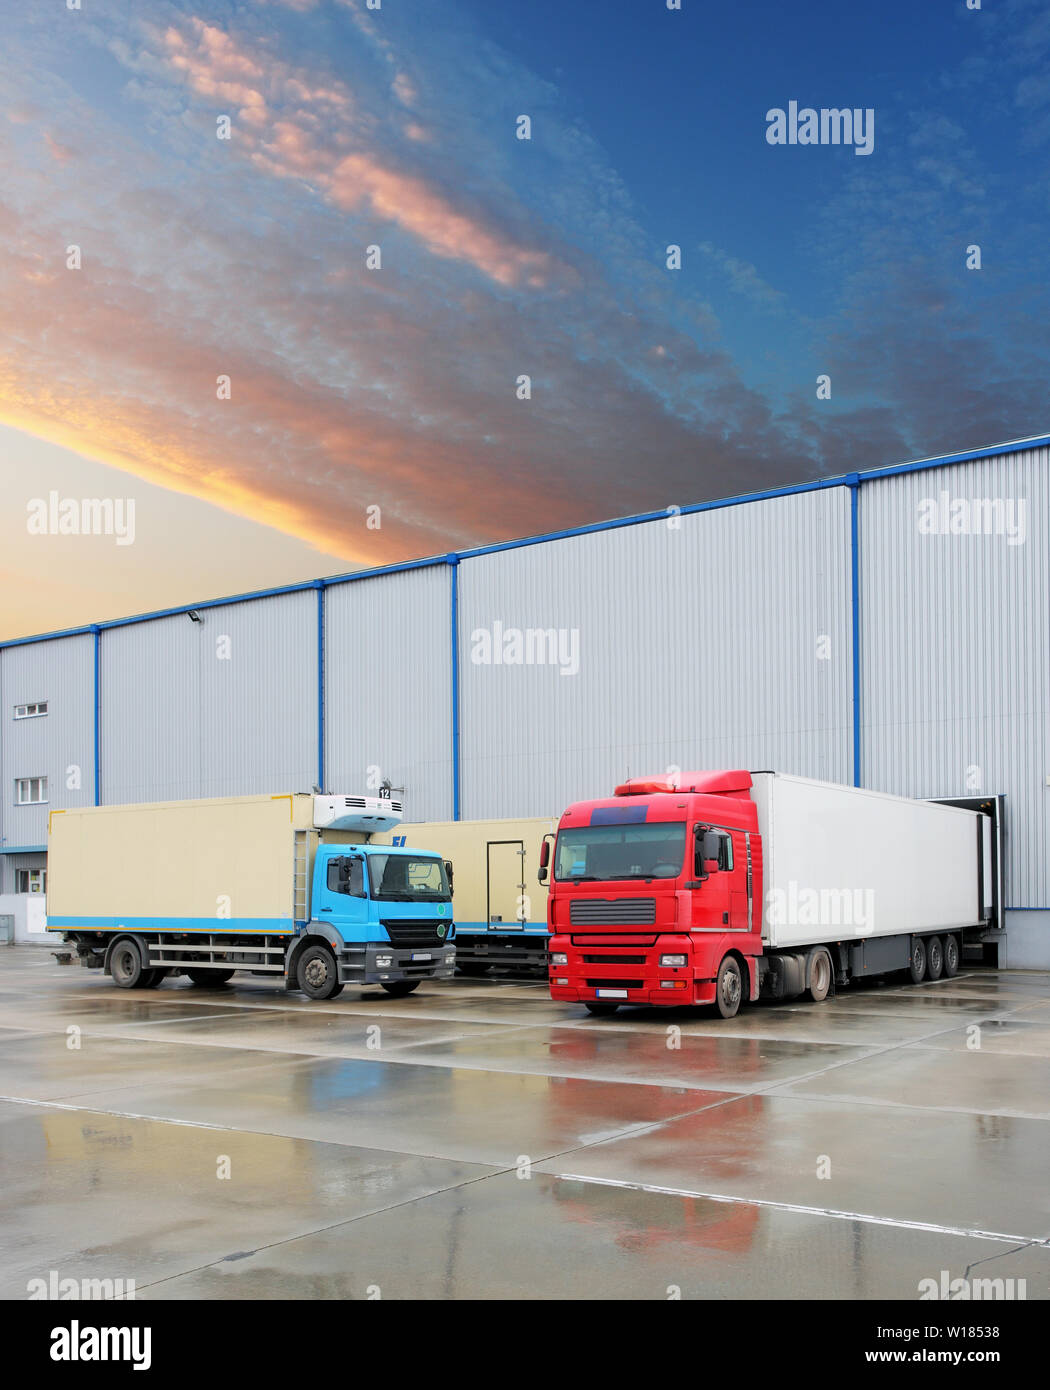 Loading docks in warehouse with truck Stock Photo